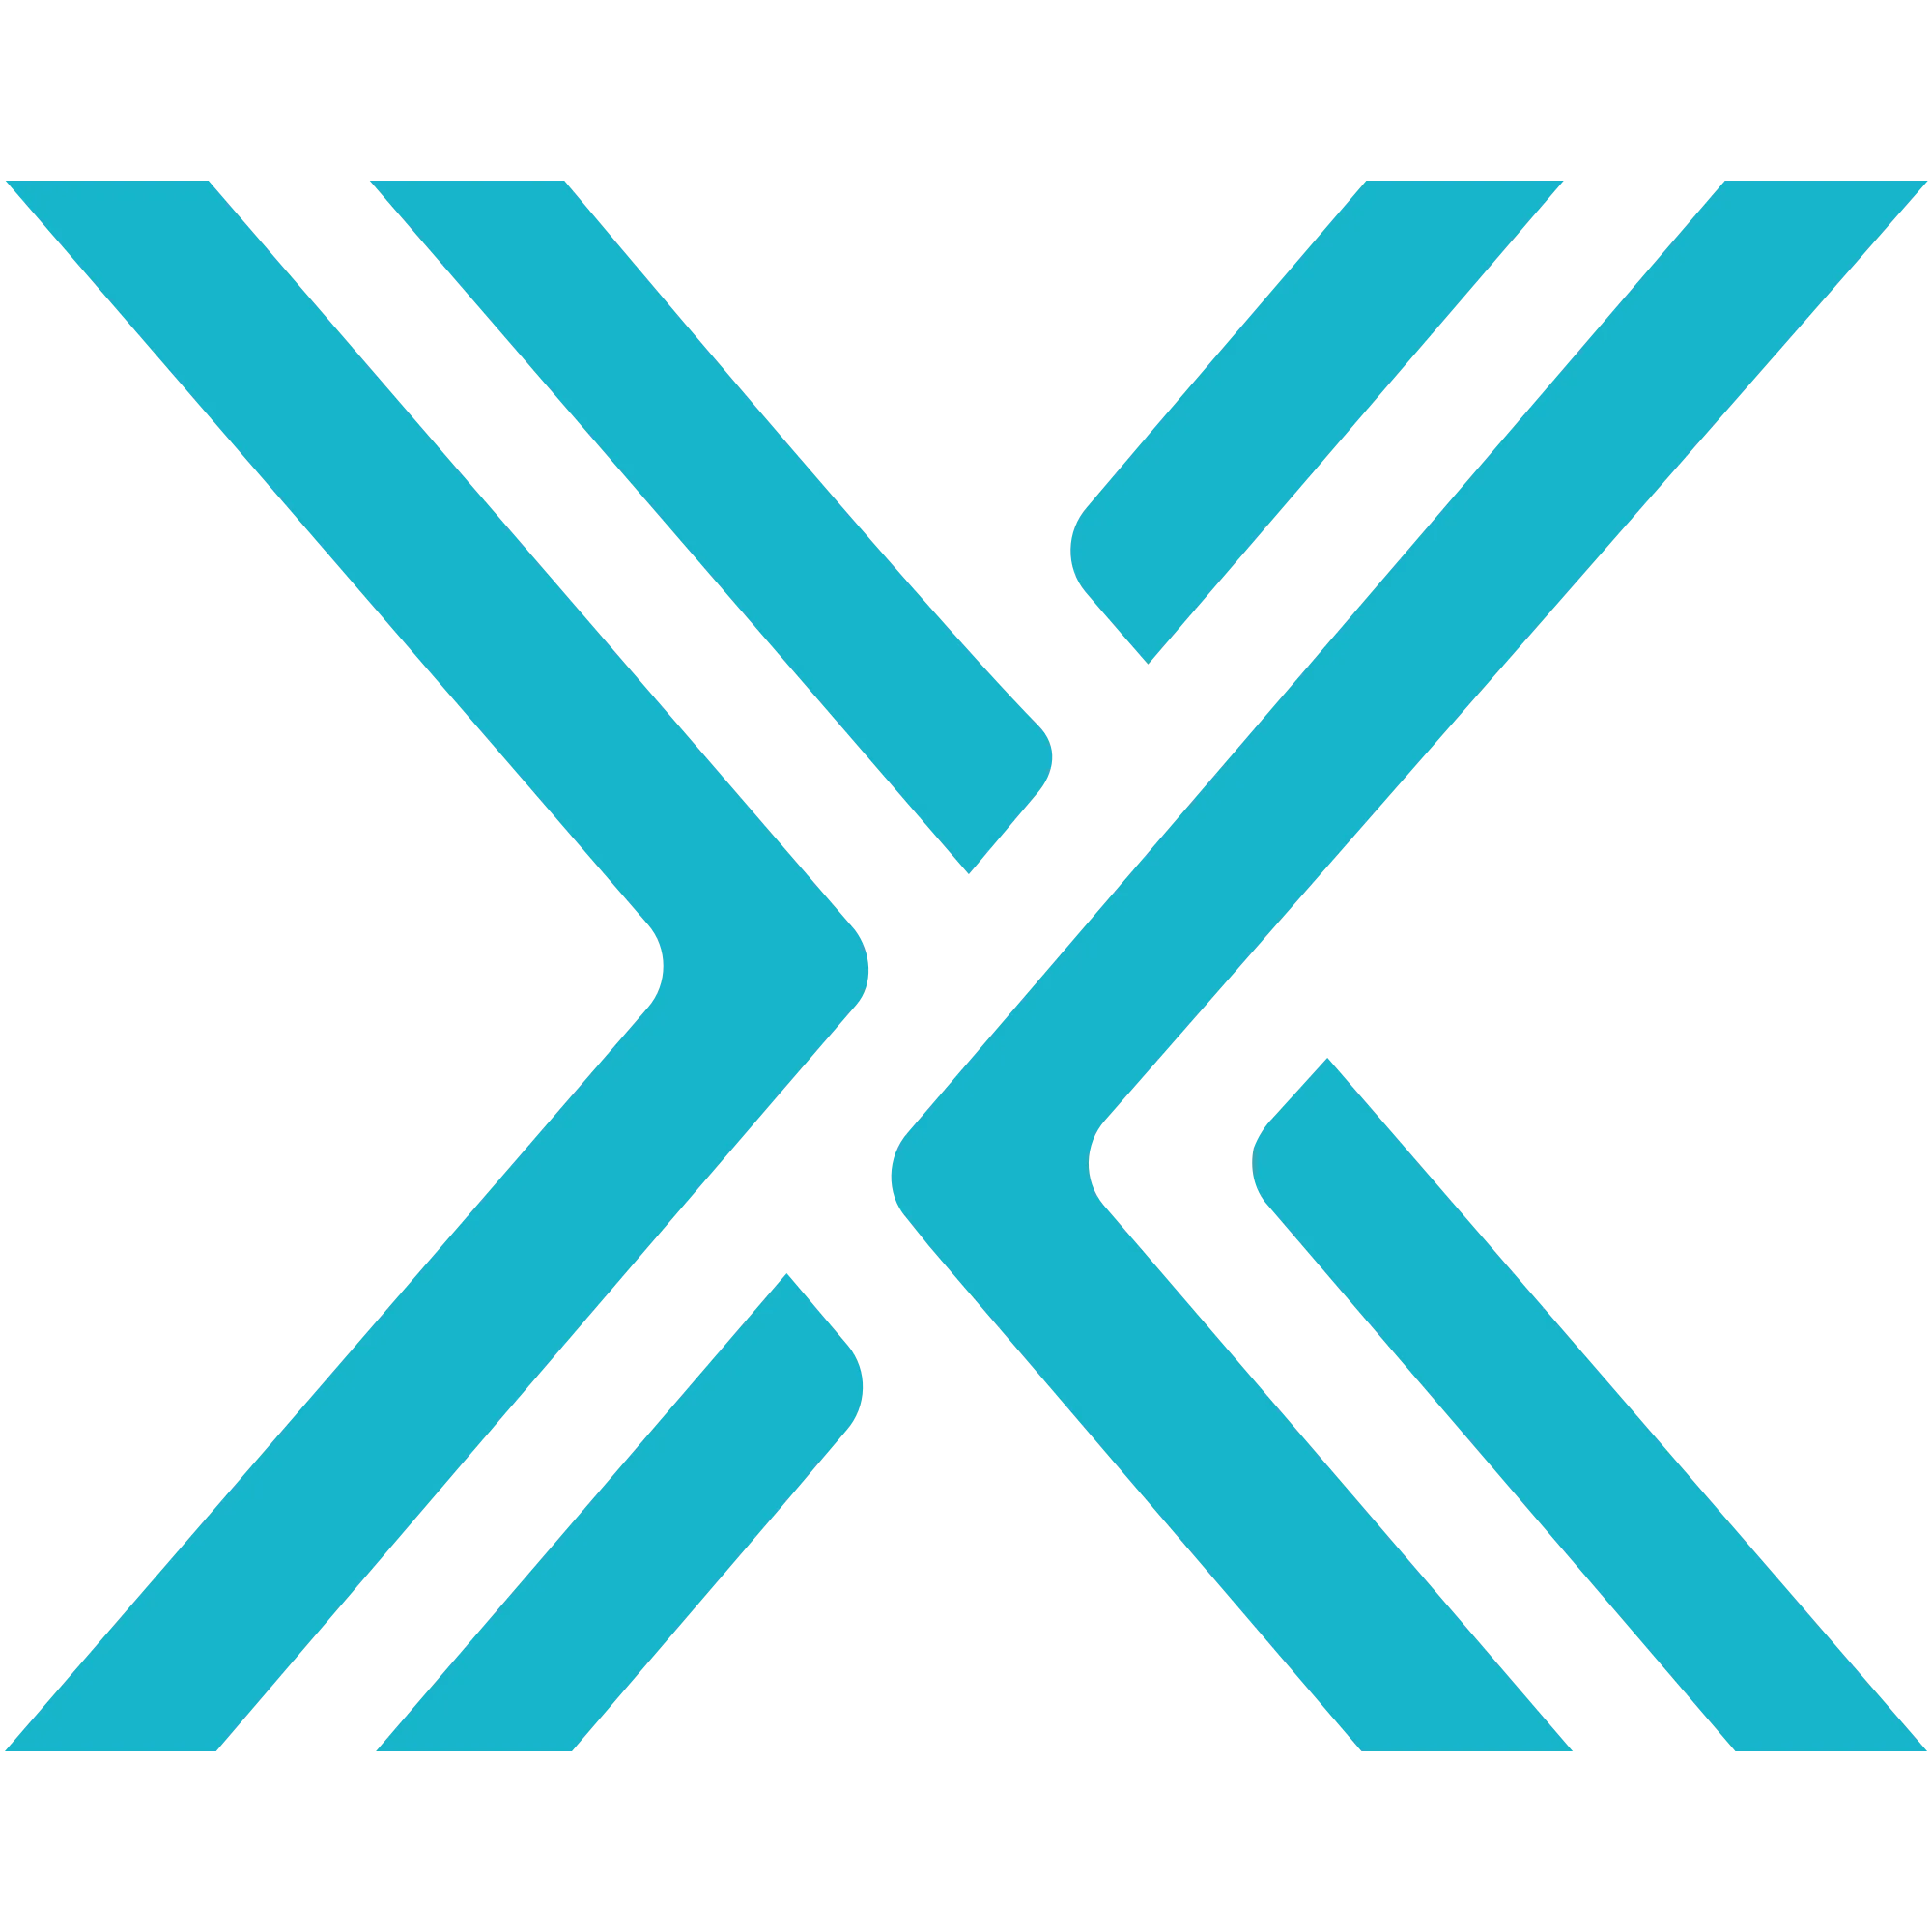 Immutable X logo in png format